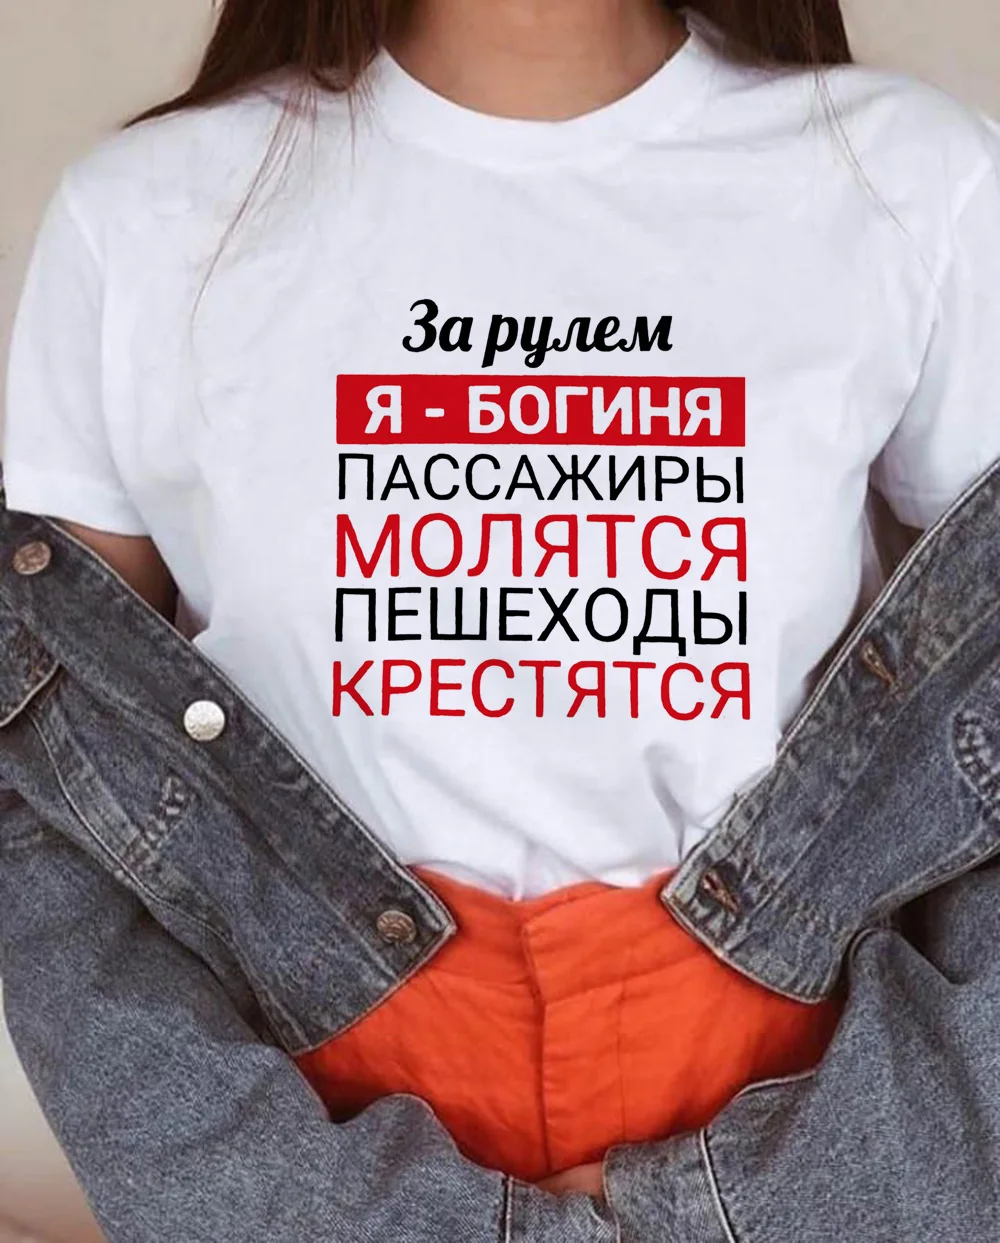 Russian Graphic Inscriptions Tees Women for Summer Female Short Sleeve T Shirts Harajuku Aesthetic Hipster Mujer Tops T-shirt